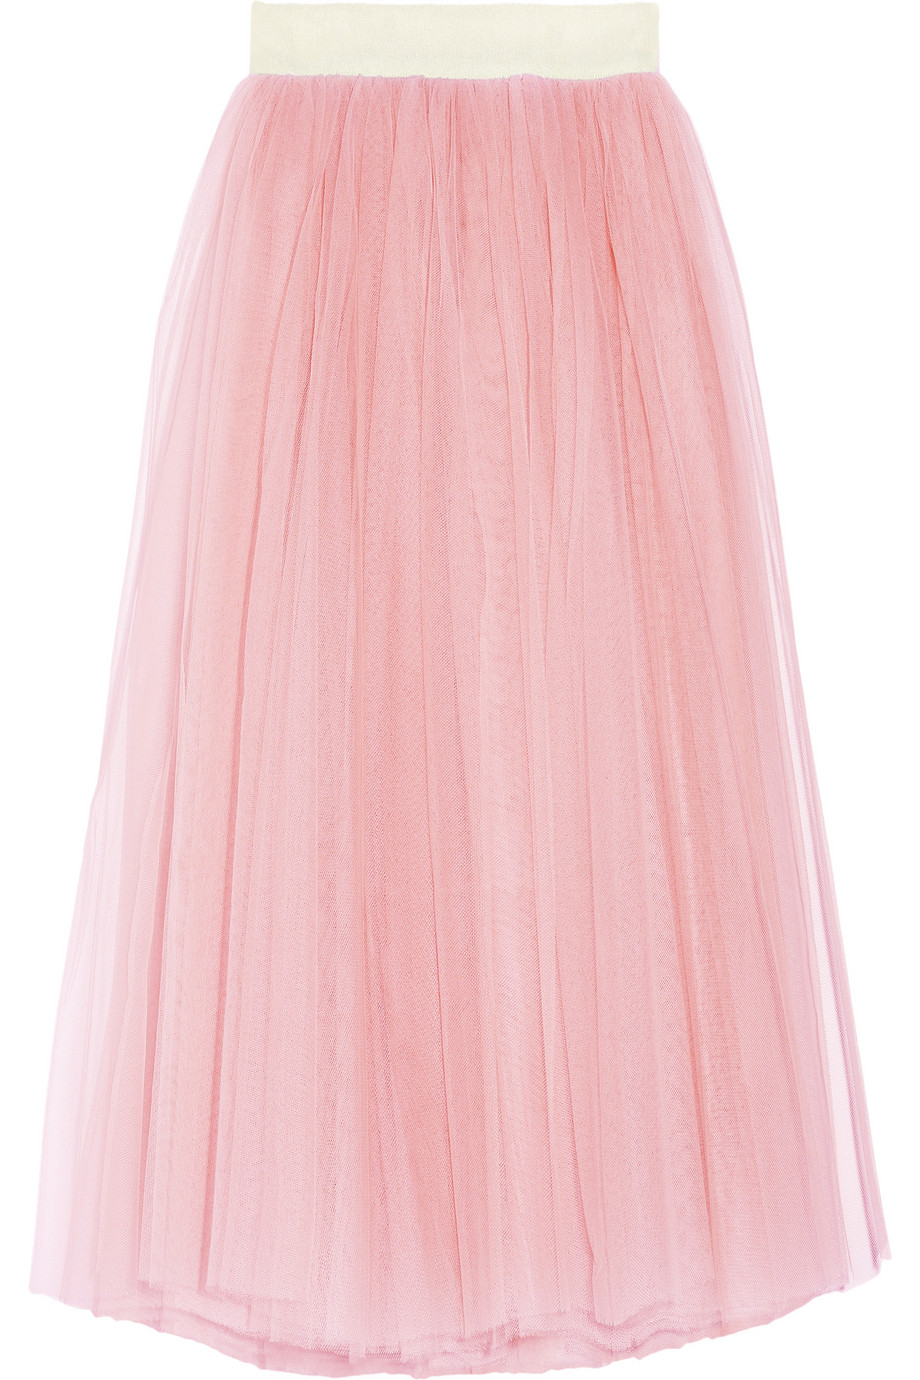 D&g Tulle Maxi Skirt in Pink | Lyst